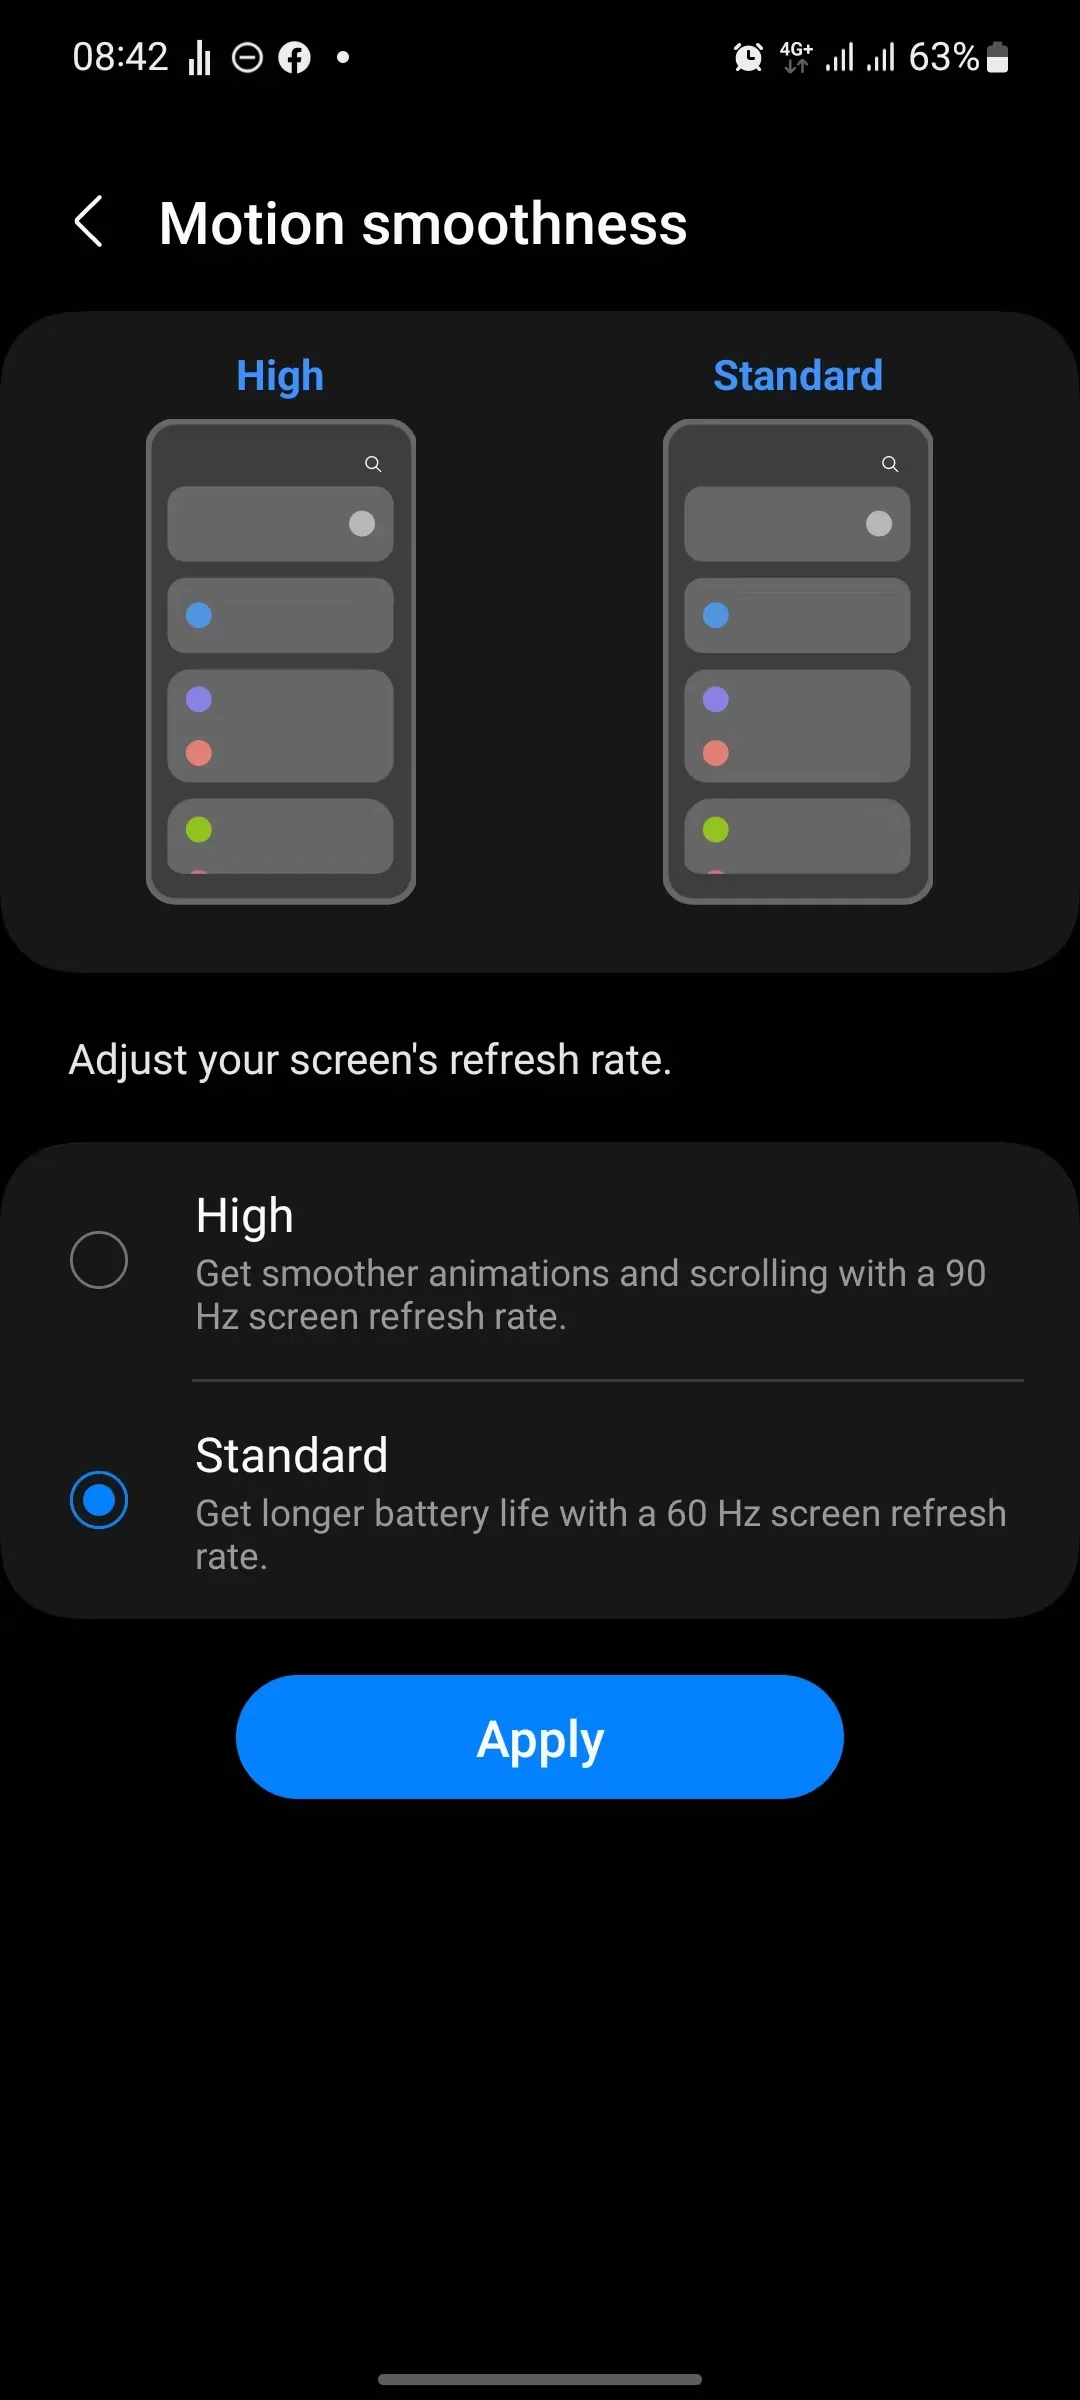 Motion smoothness settings on a Samsung